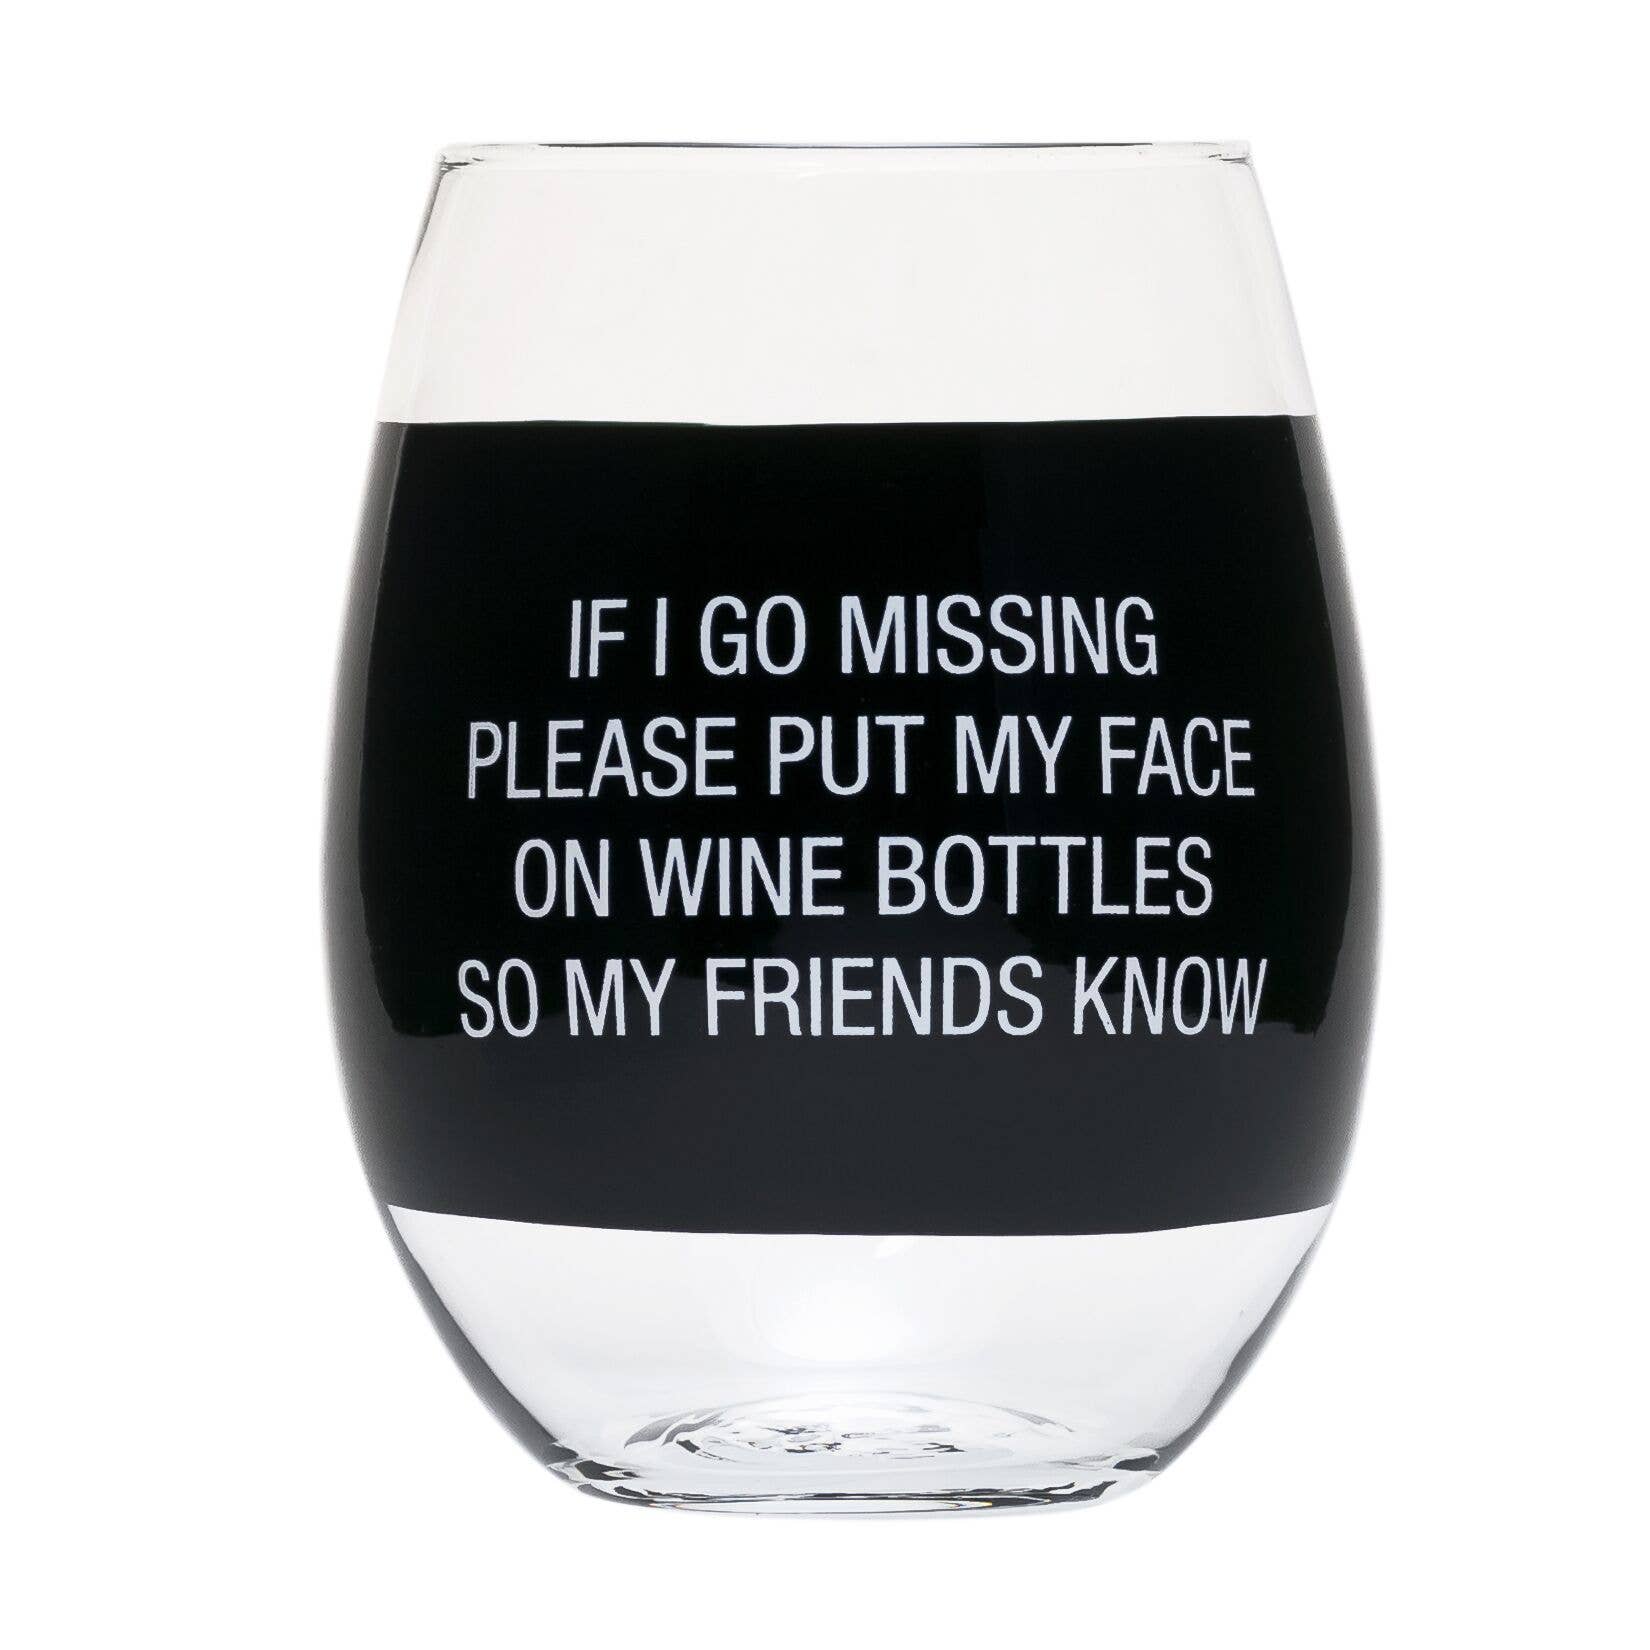 About Face Designs, Inc. My Face on Wine Bottles Wine Glass